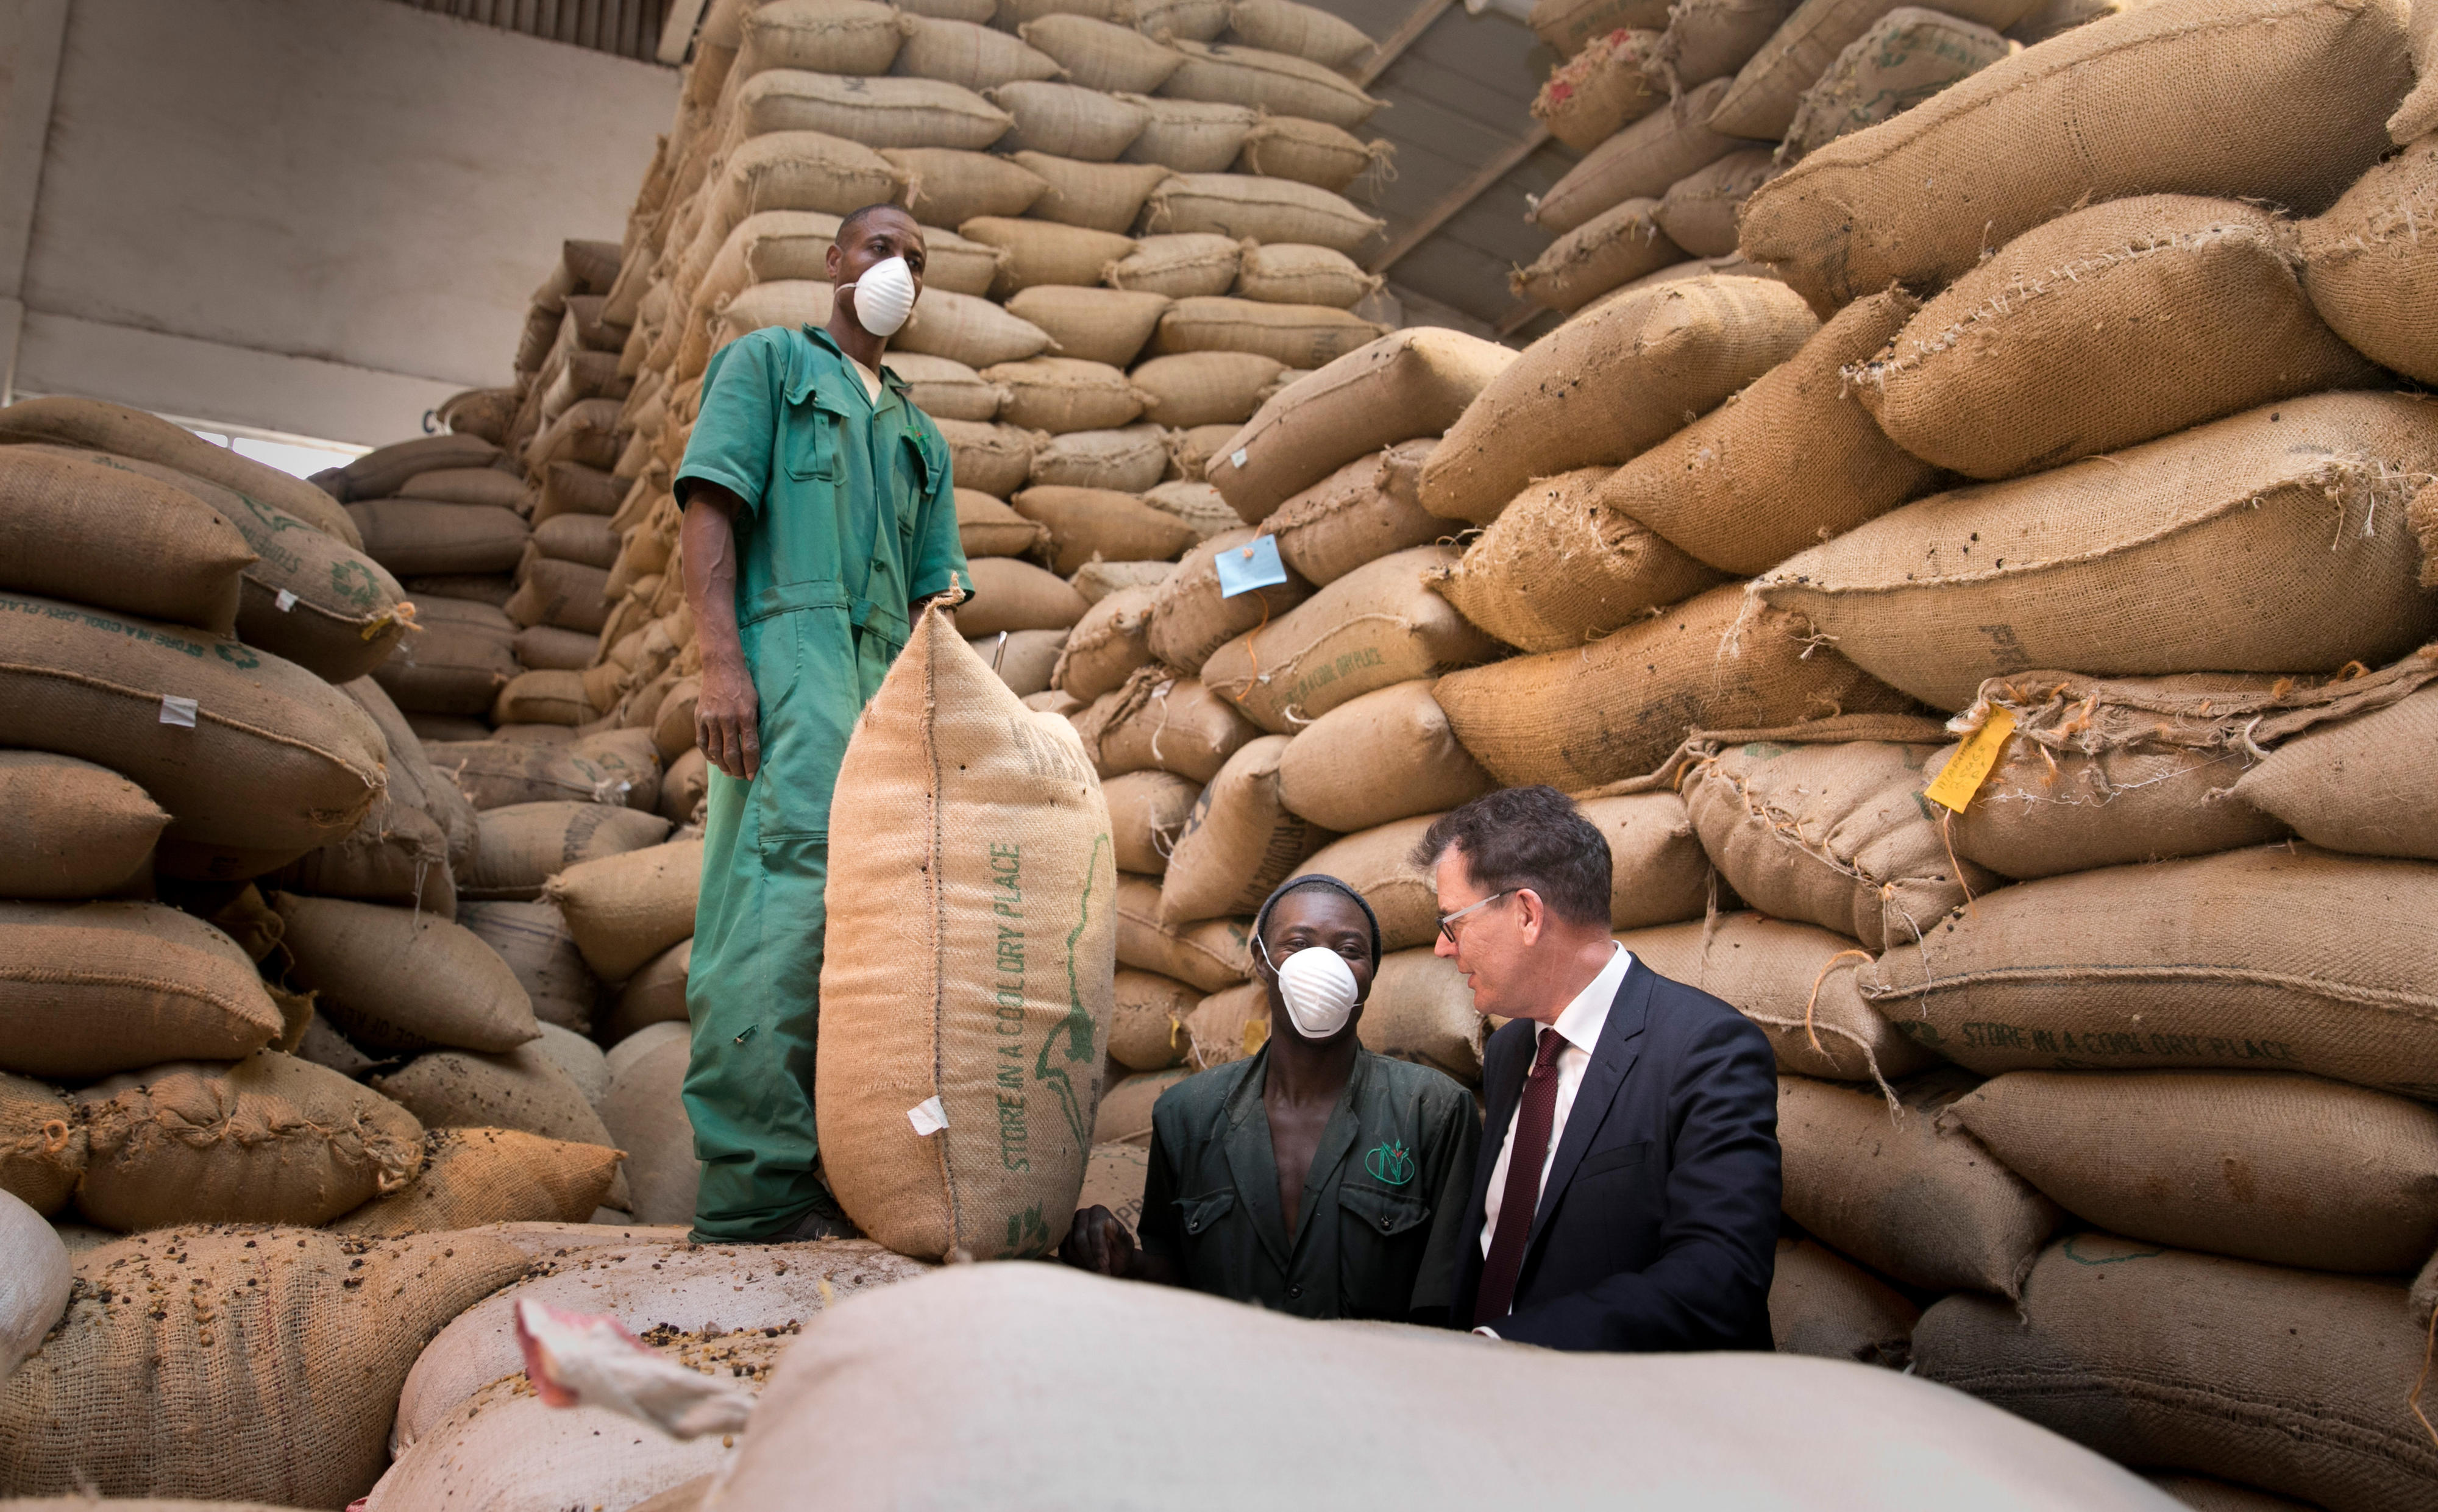 Minister Gerd Müller talks to workers at Kenya's largest coffee roasting plant in Thika.